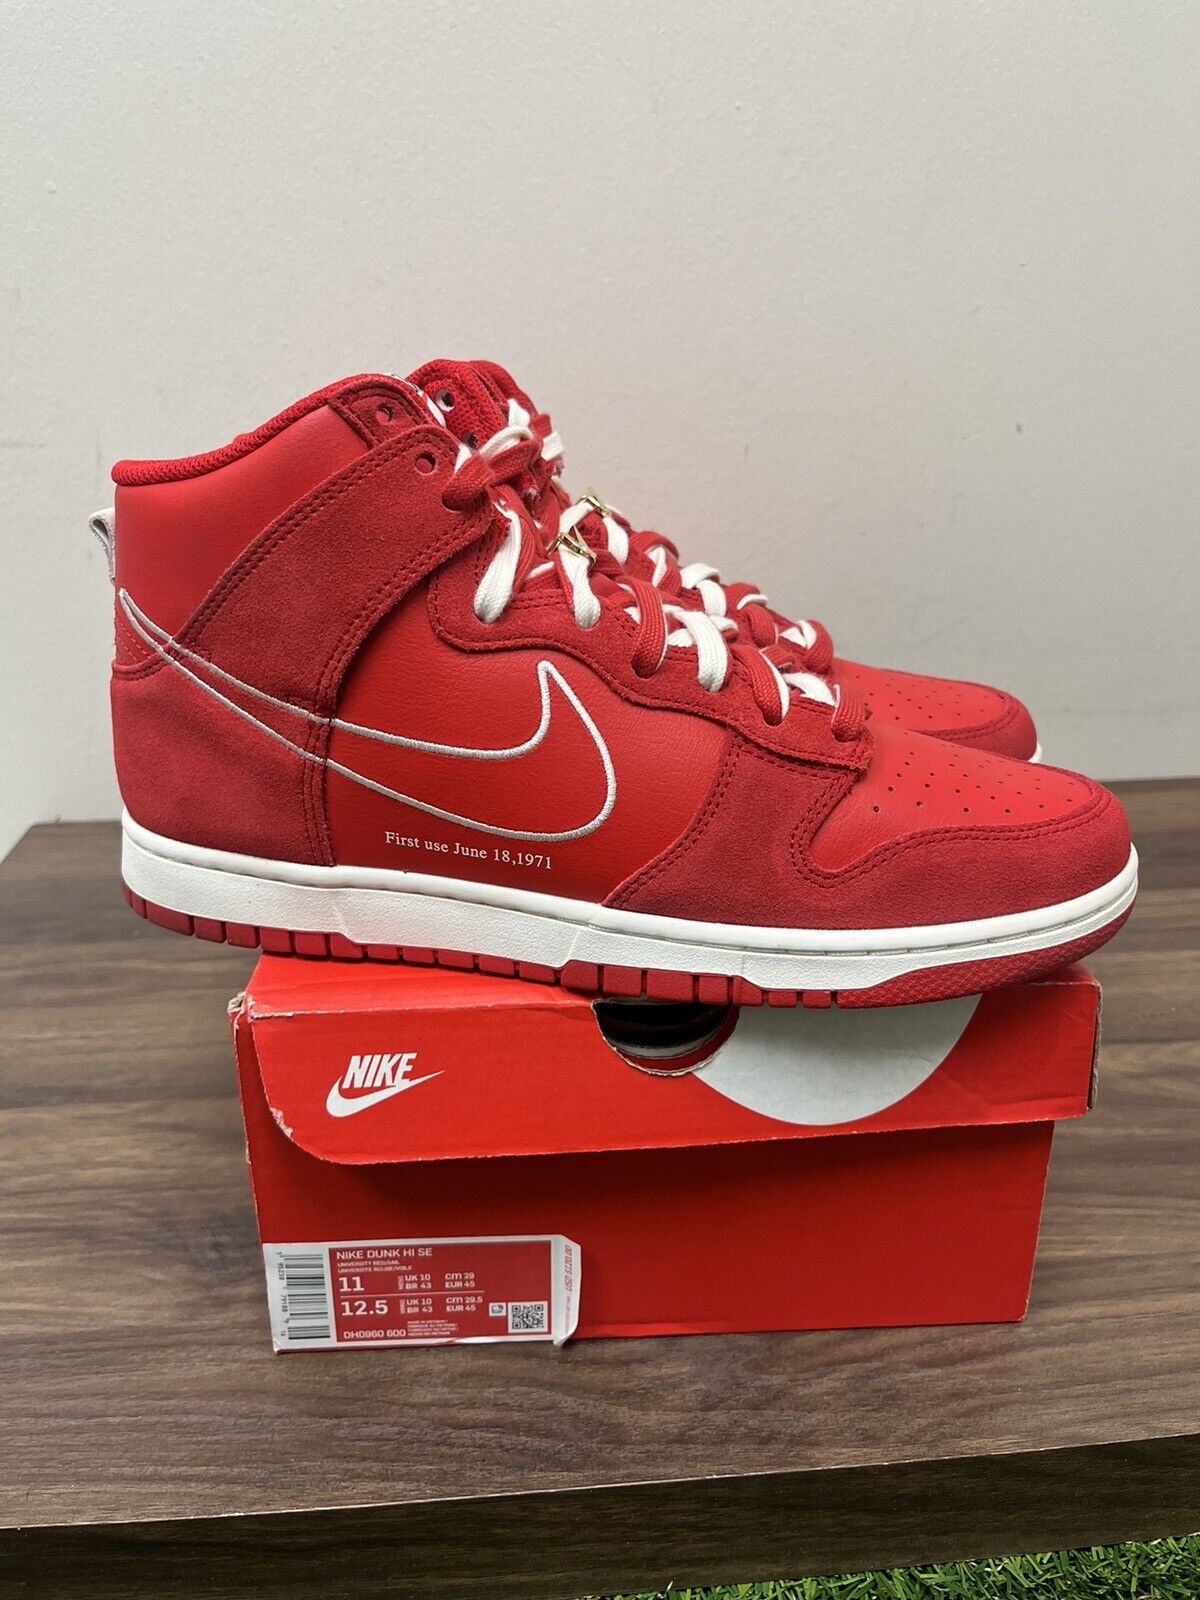 Size 11 - Nike Dunk High SE First Use Pre-Owned DH0960-600